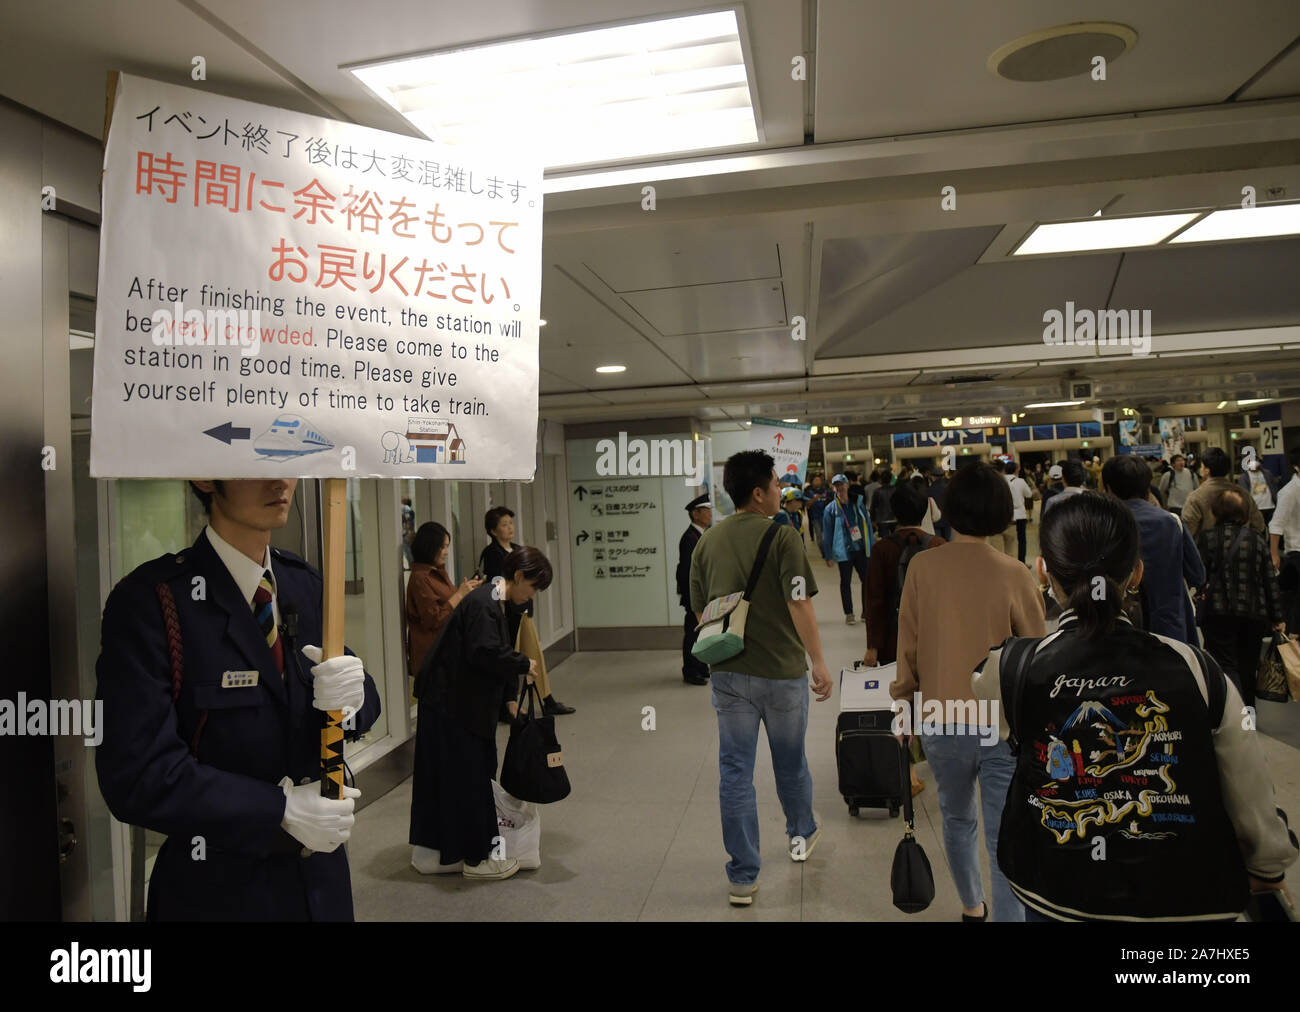 Tokyo, Japan. 2nd Nov, 2019. A station atendent holds an advisory sign at the Shin-Yokohama Station near the International Stadium Yokohama in Kanagawa Prefecture, Japan before the Rugby World Cup 2019 final match between England and South Africa in which South Africa's won 32 - 12 on November 2, 2019. Photo by: Ramiro Agustin Vargas Tabares Credit: Ramiro Agustin Vargas Tabares/ZUMA Wire/Alamy Live News Stock Photo